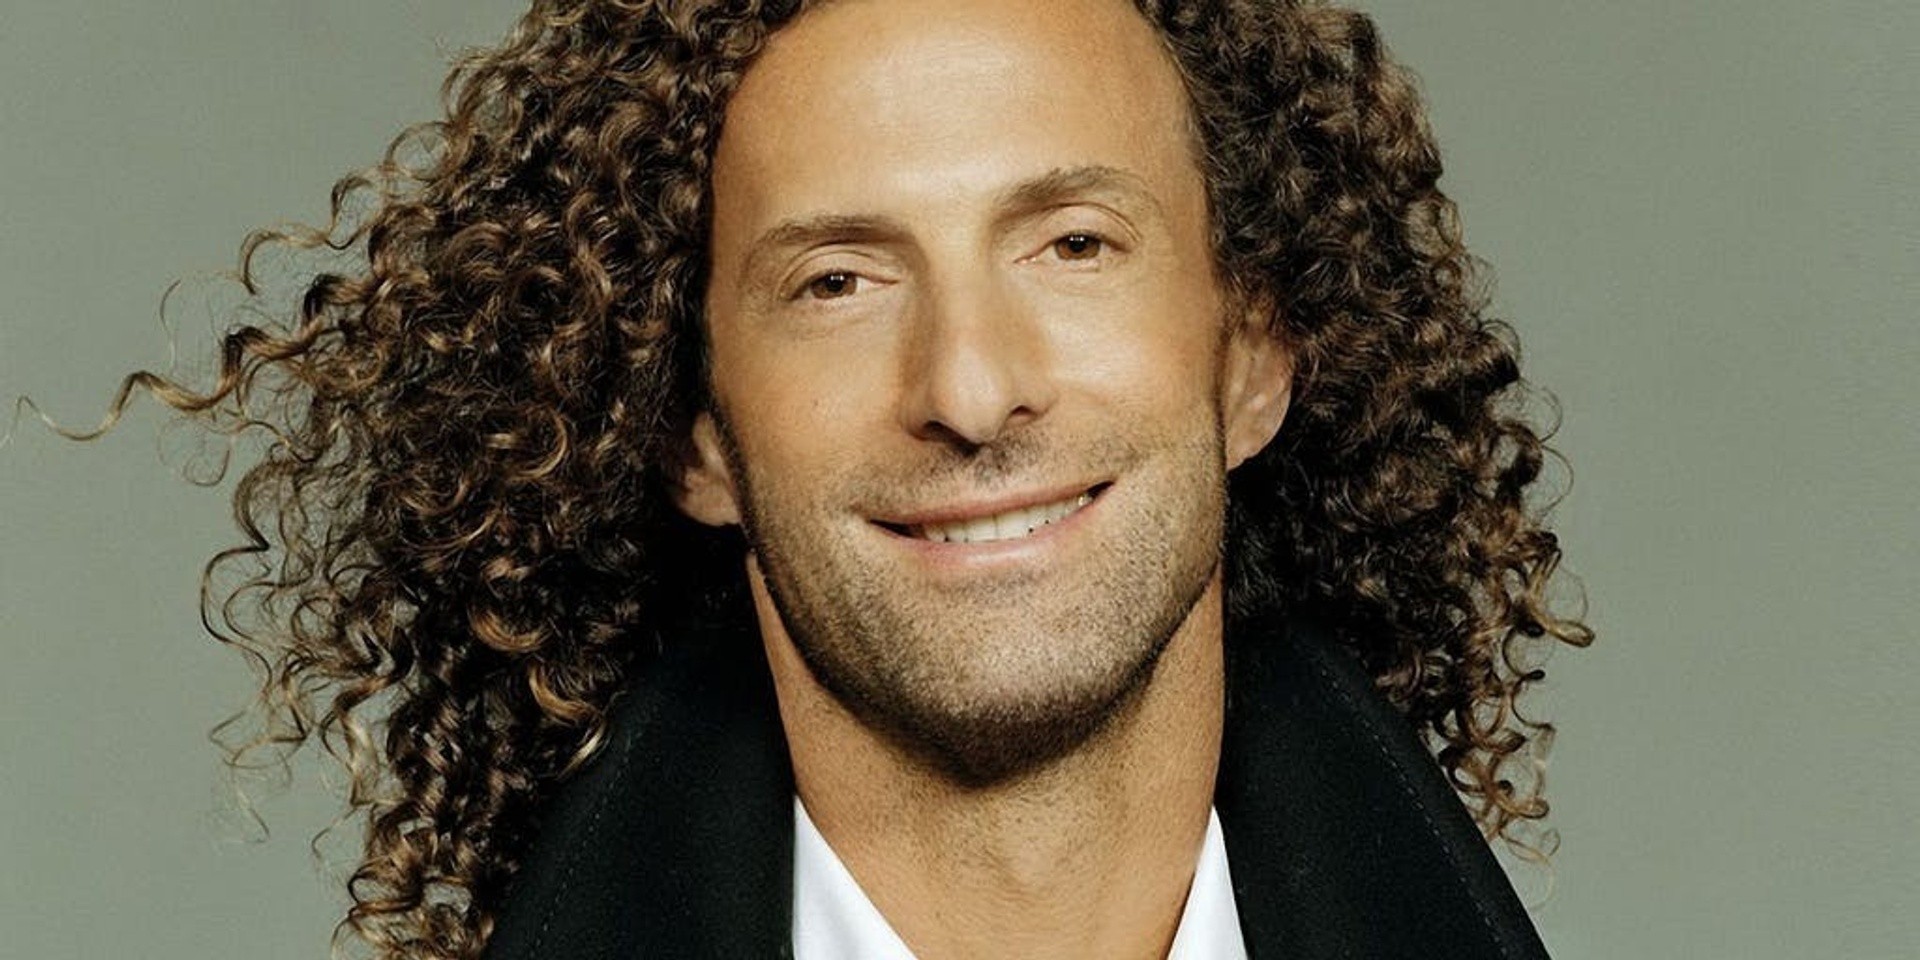 Kenny G to perform in Singapore this November